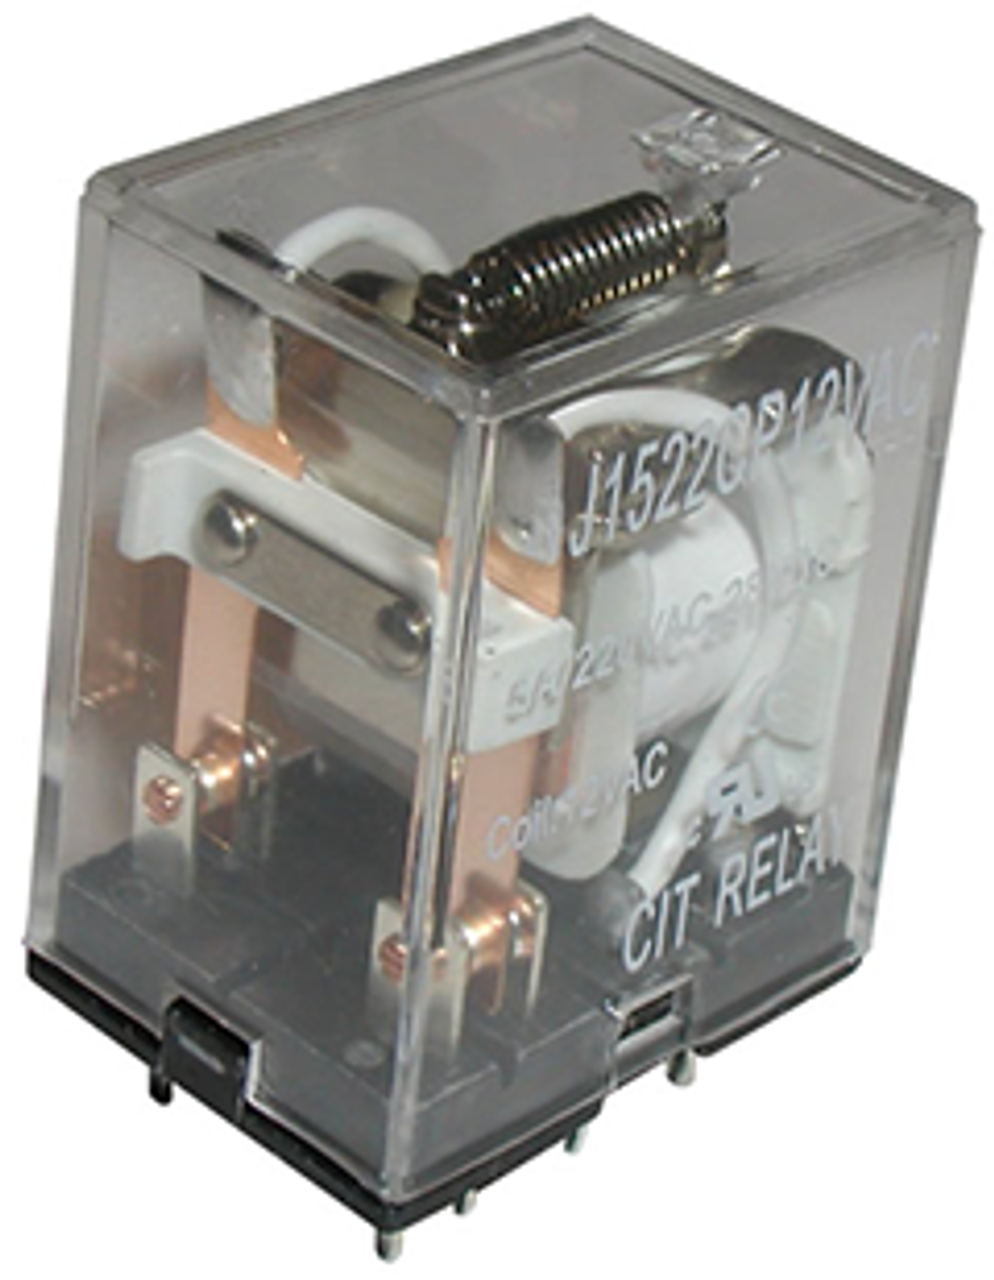 CIT Relay and Switch J1523CT110VDCD Industrial Relays